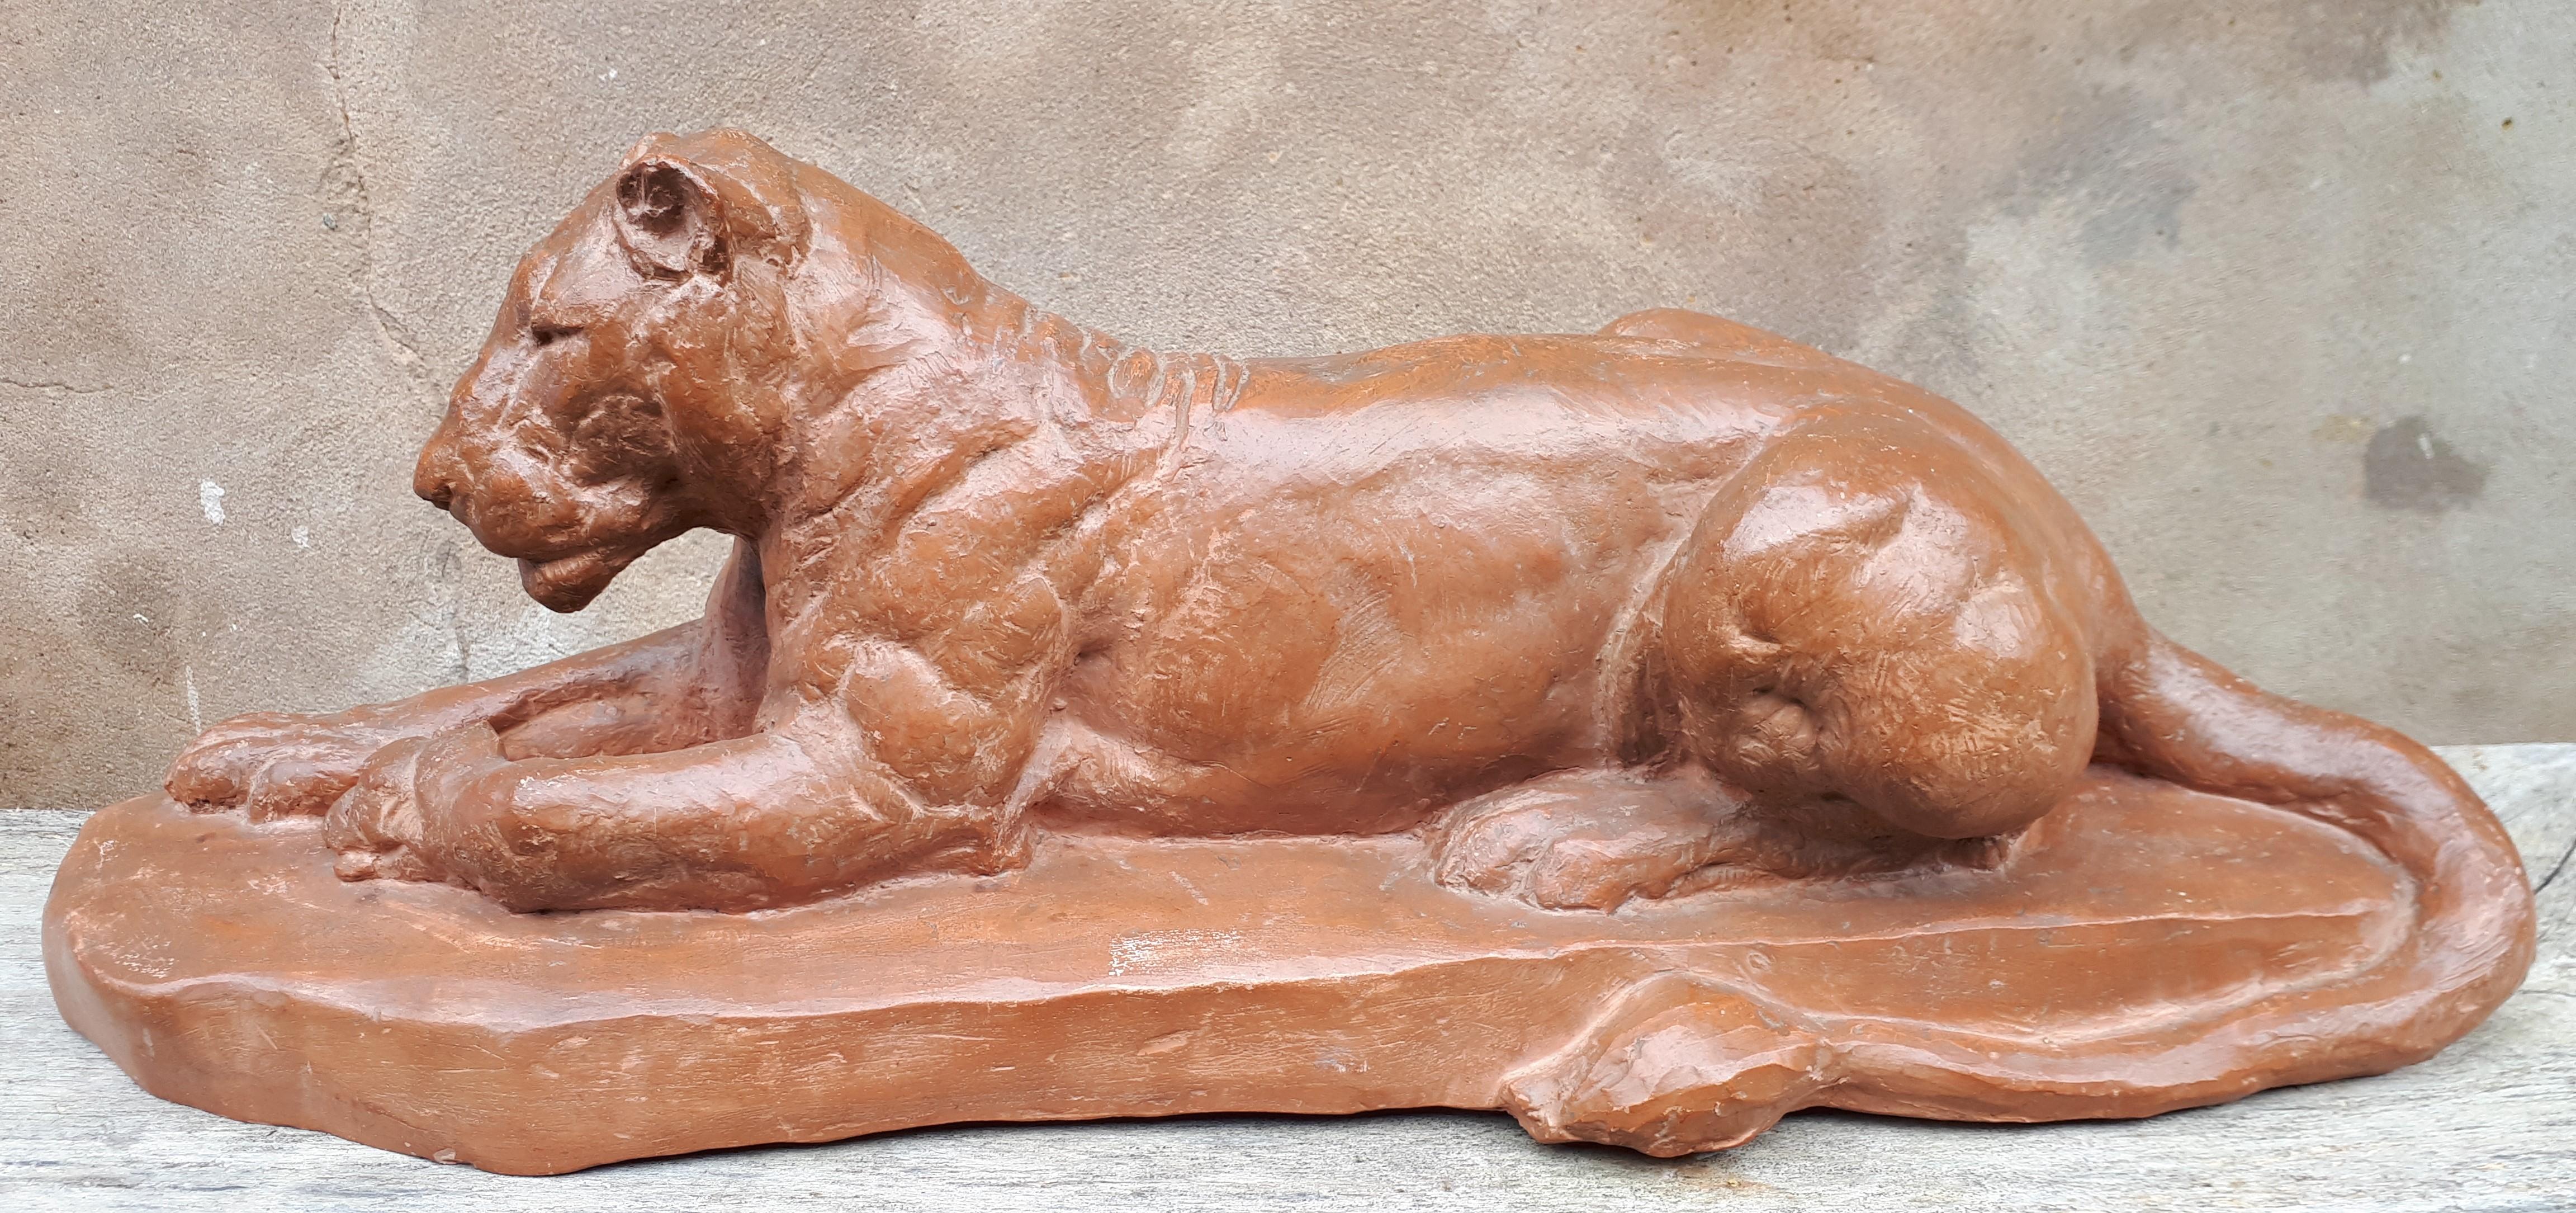 Patinated terracotta animal sculpture representing a reclining lioness.
Signature of the artist 